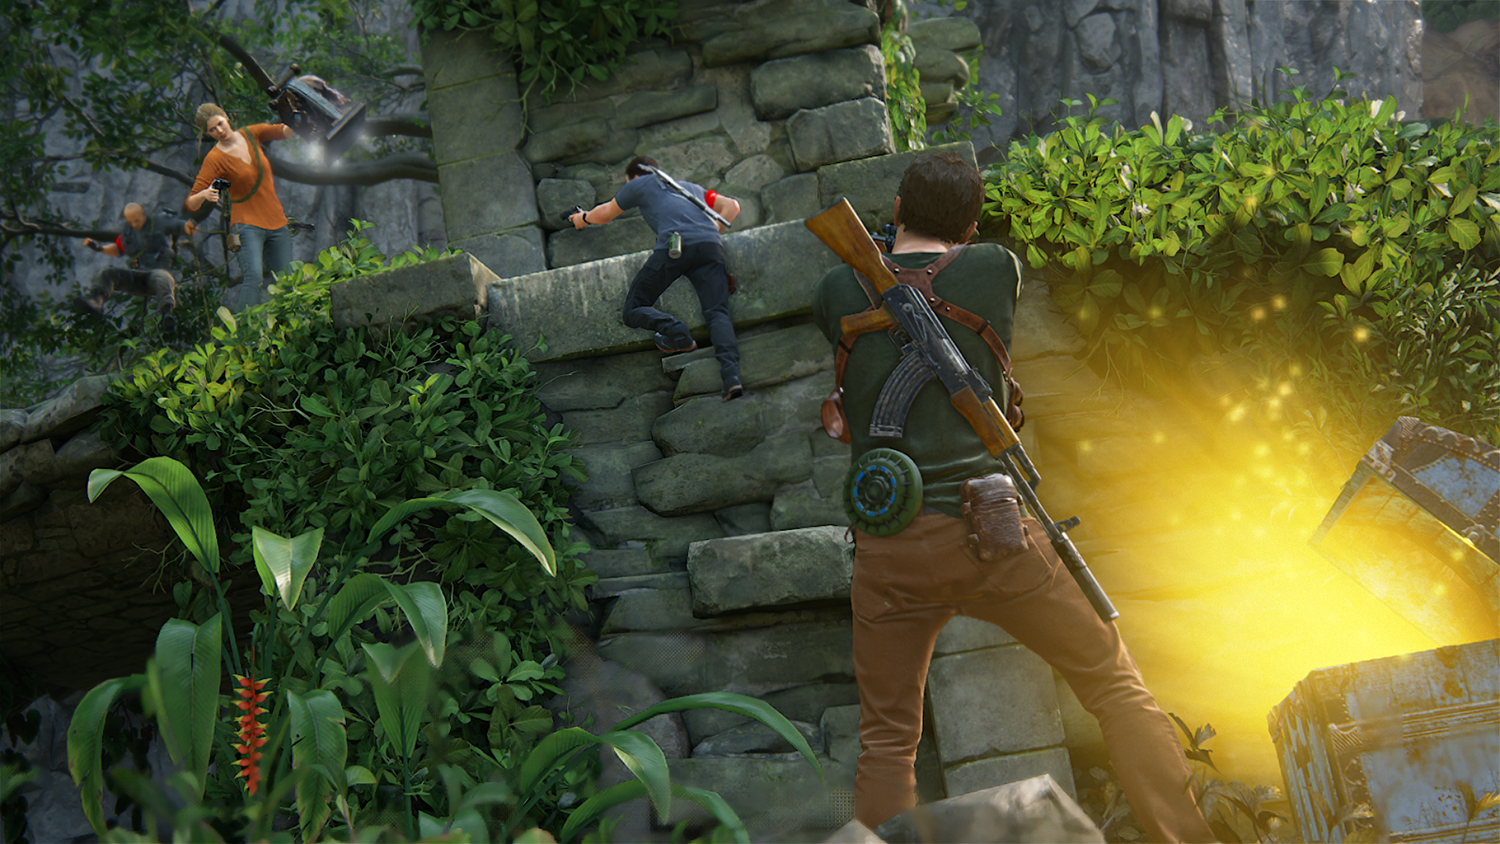 Uncharted 4: A Thief's End Review